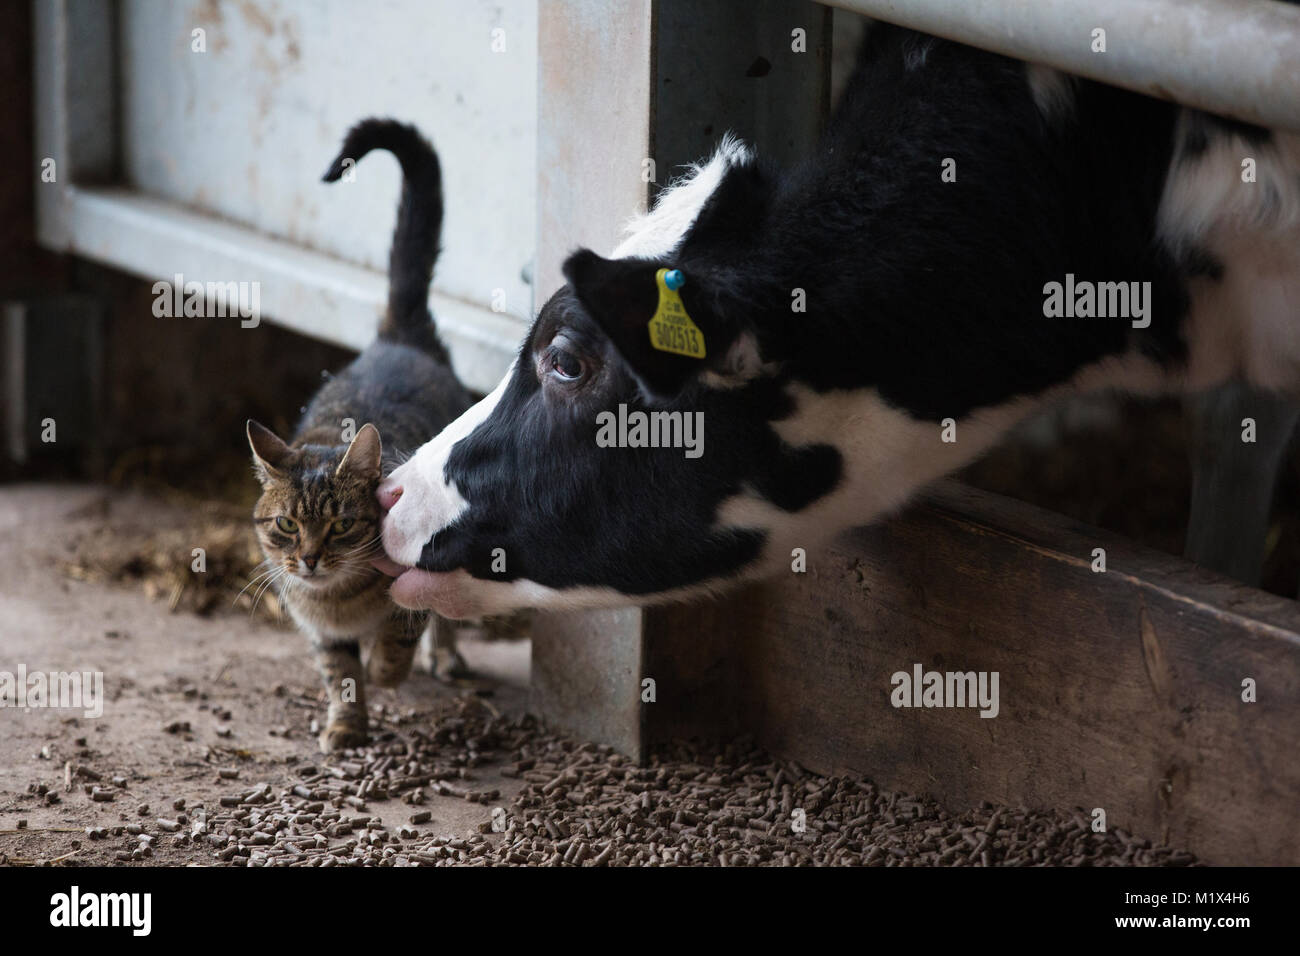 A farmyard cat gets a lick from a friendly cow in a cattle shed on a farm in North England, UK Stock Photo